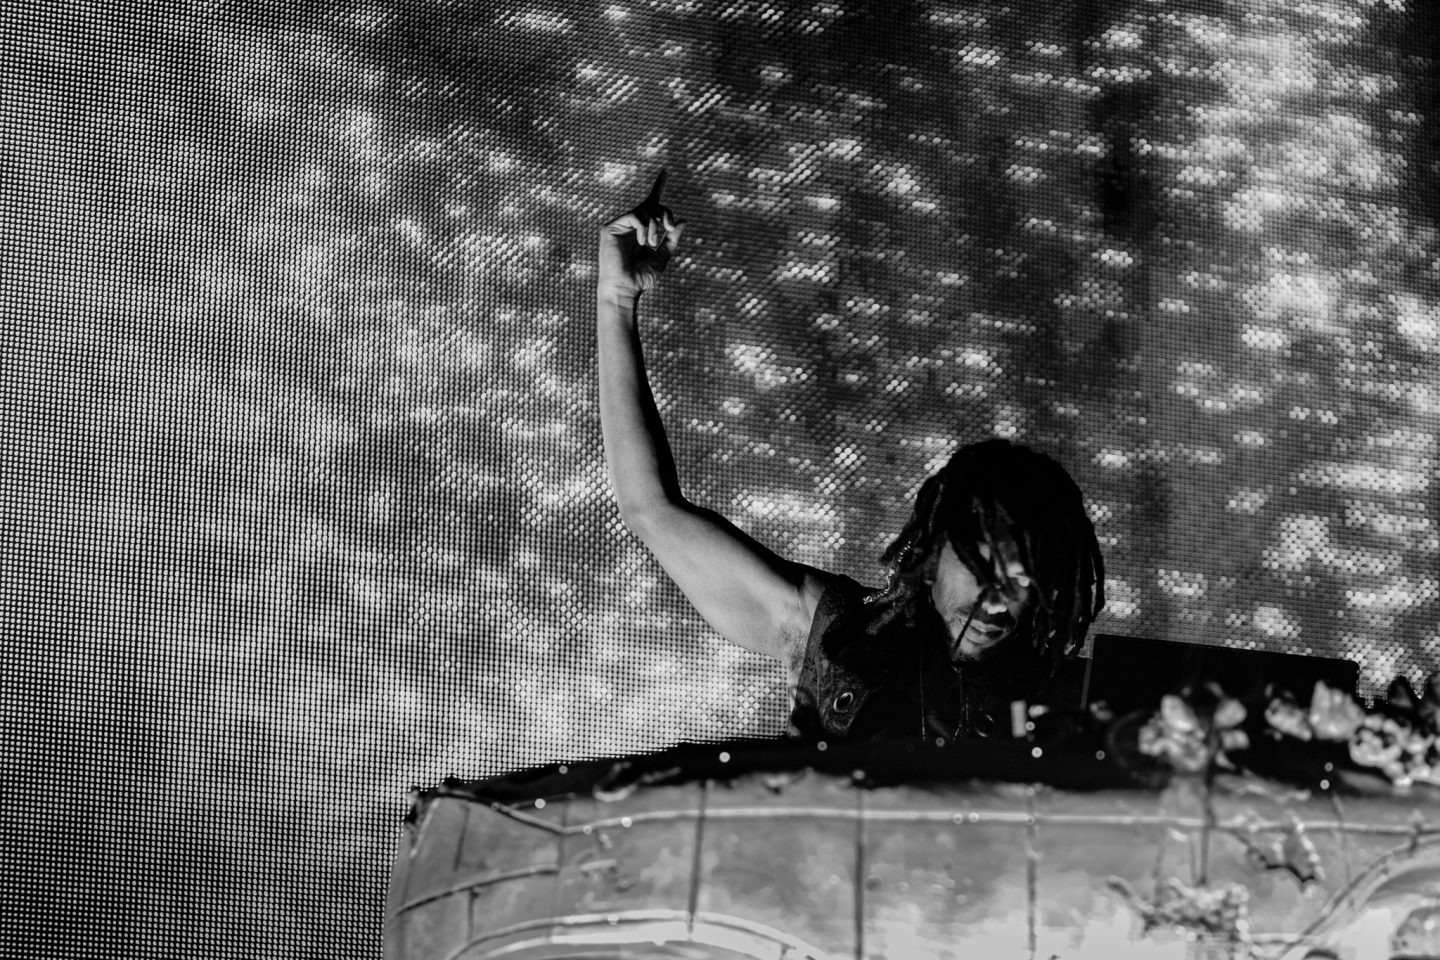 Flying Lotus at The Vic Theatre by Liina Raud Photography